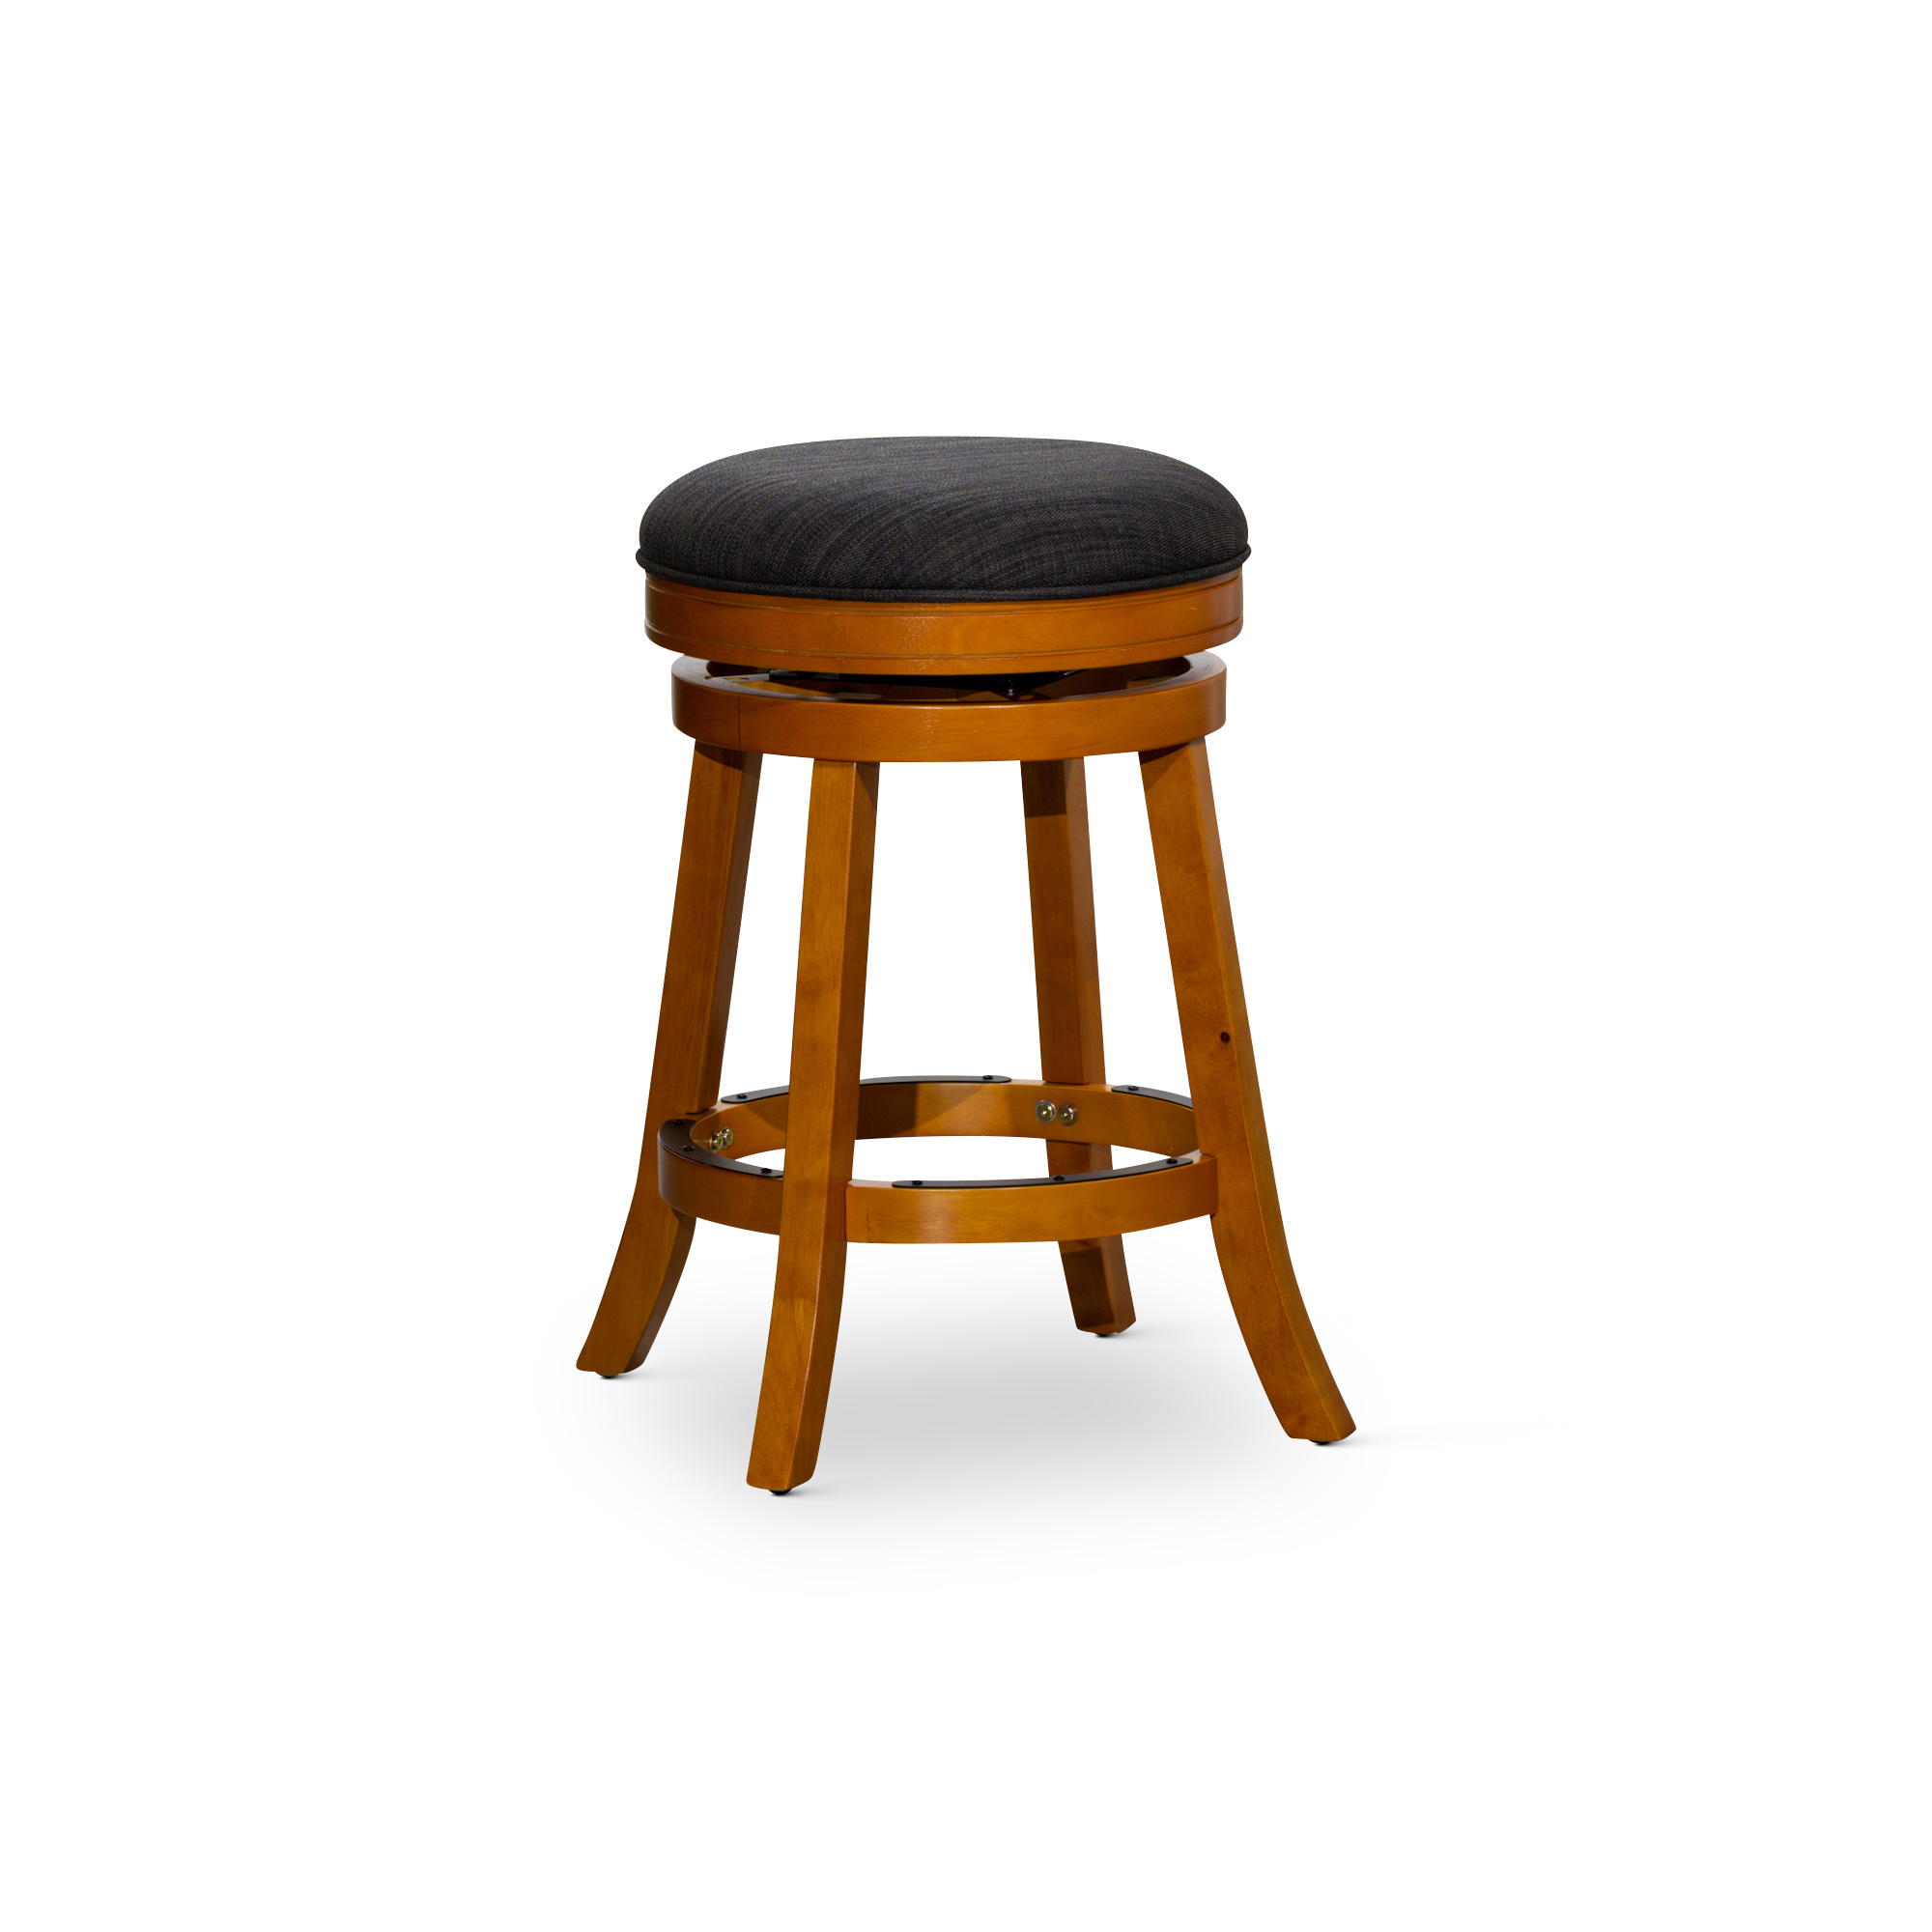 24" Counter Stool, Natural Finish, Charcoal Fabric Seat